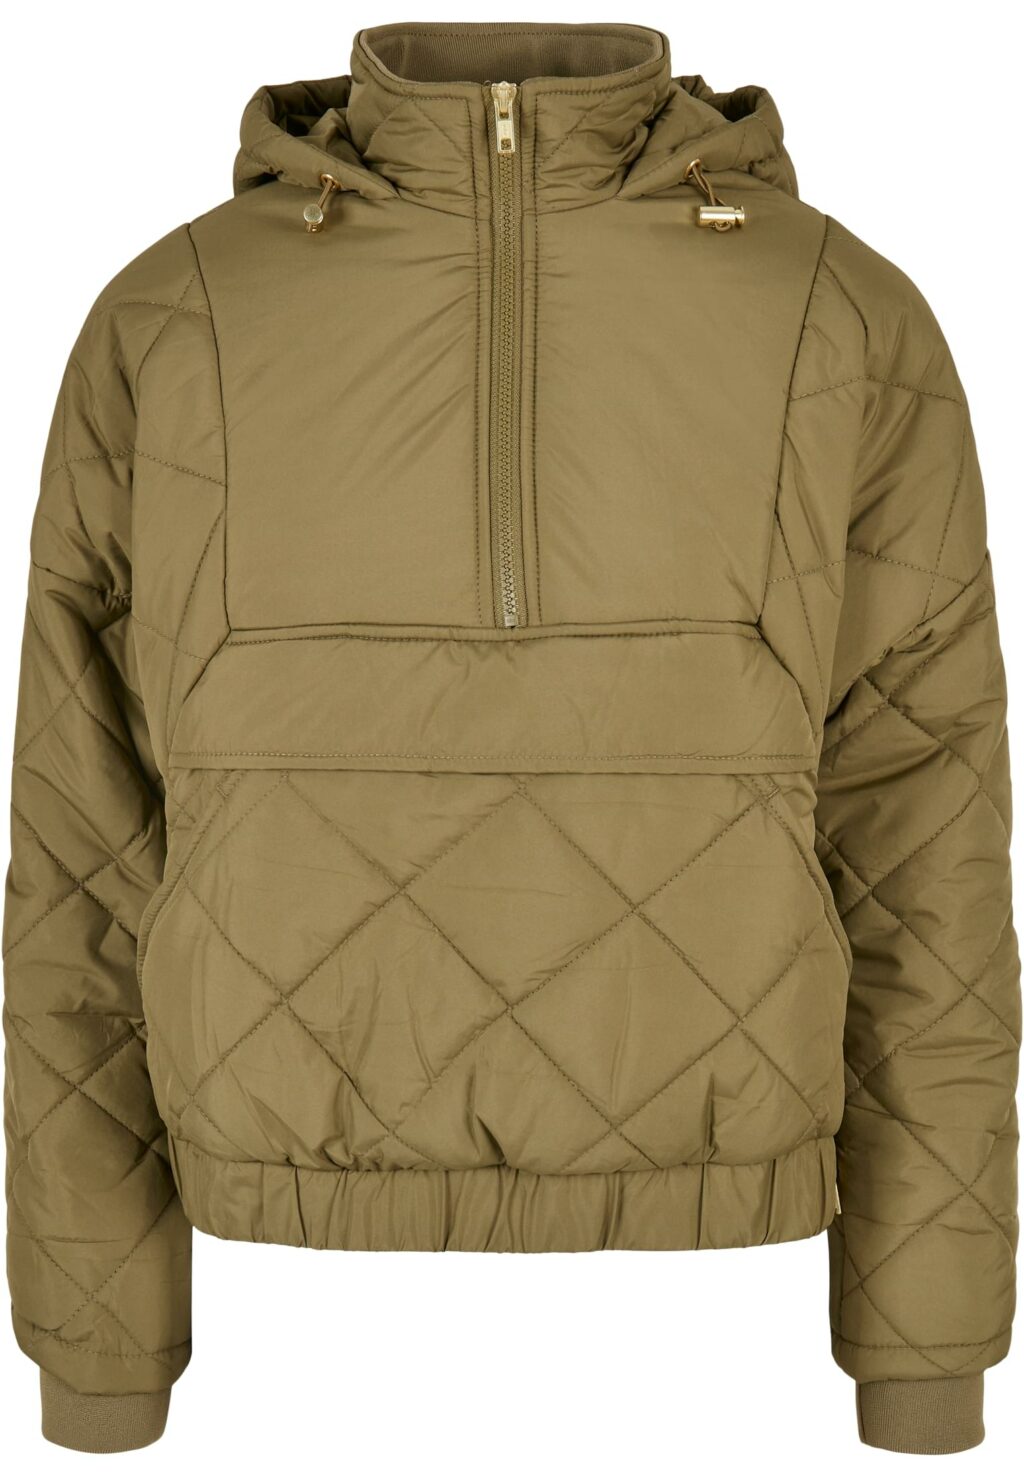 Urban Classics Ladies Oversized Diamond Quilted Pull Over Jacket tiniolive TB4555